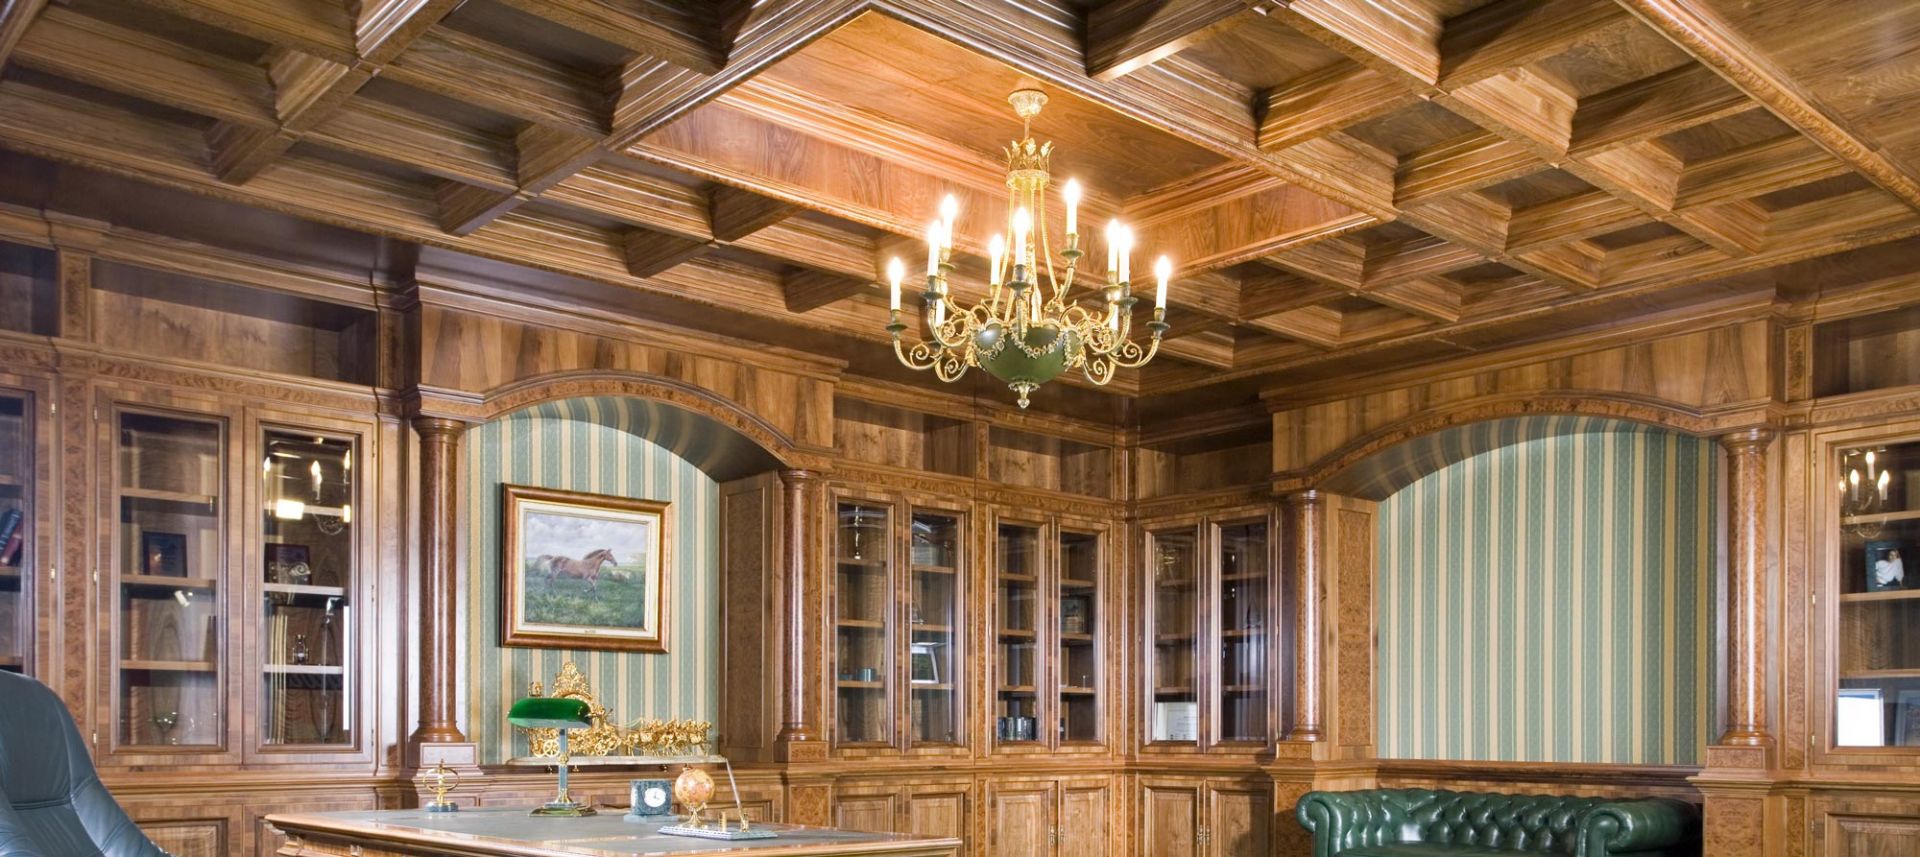 Wooden coffered ceilings